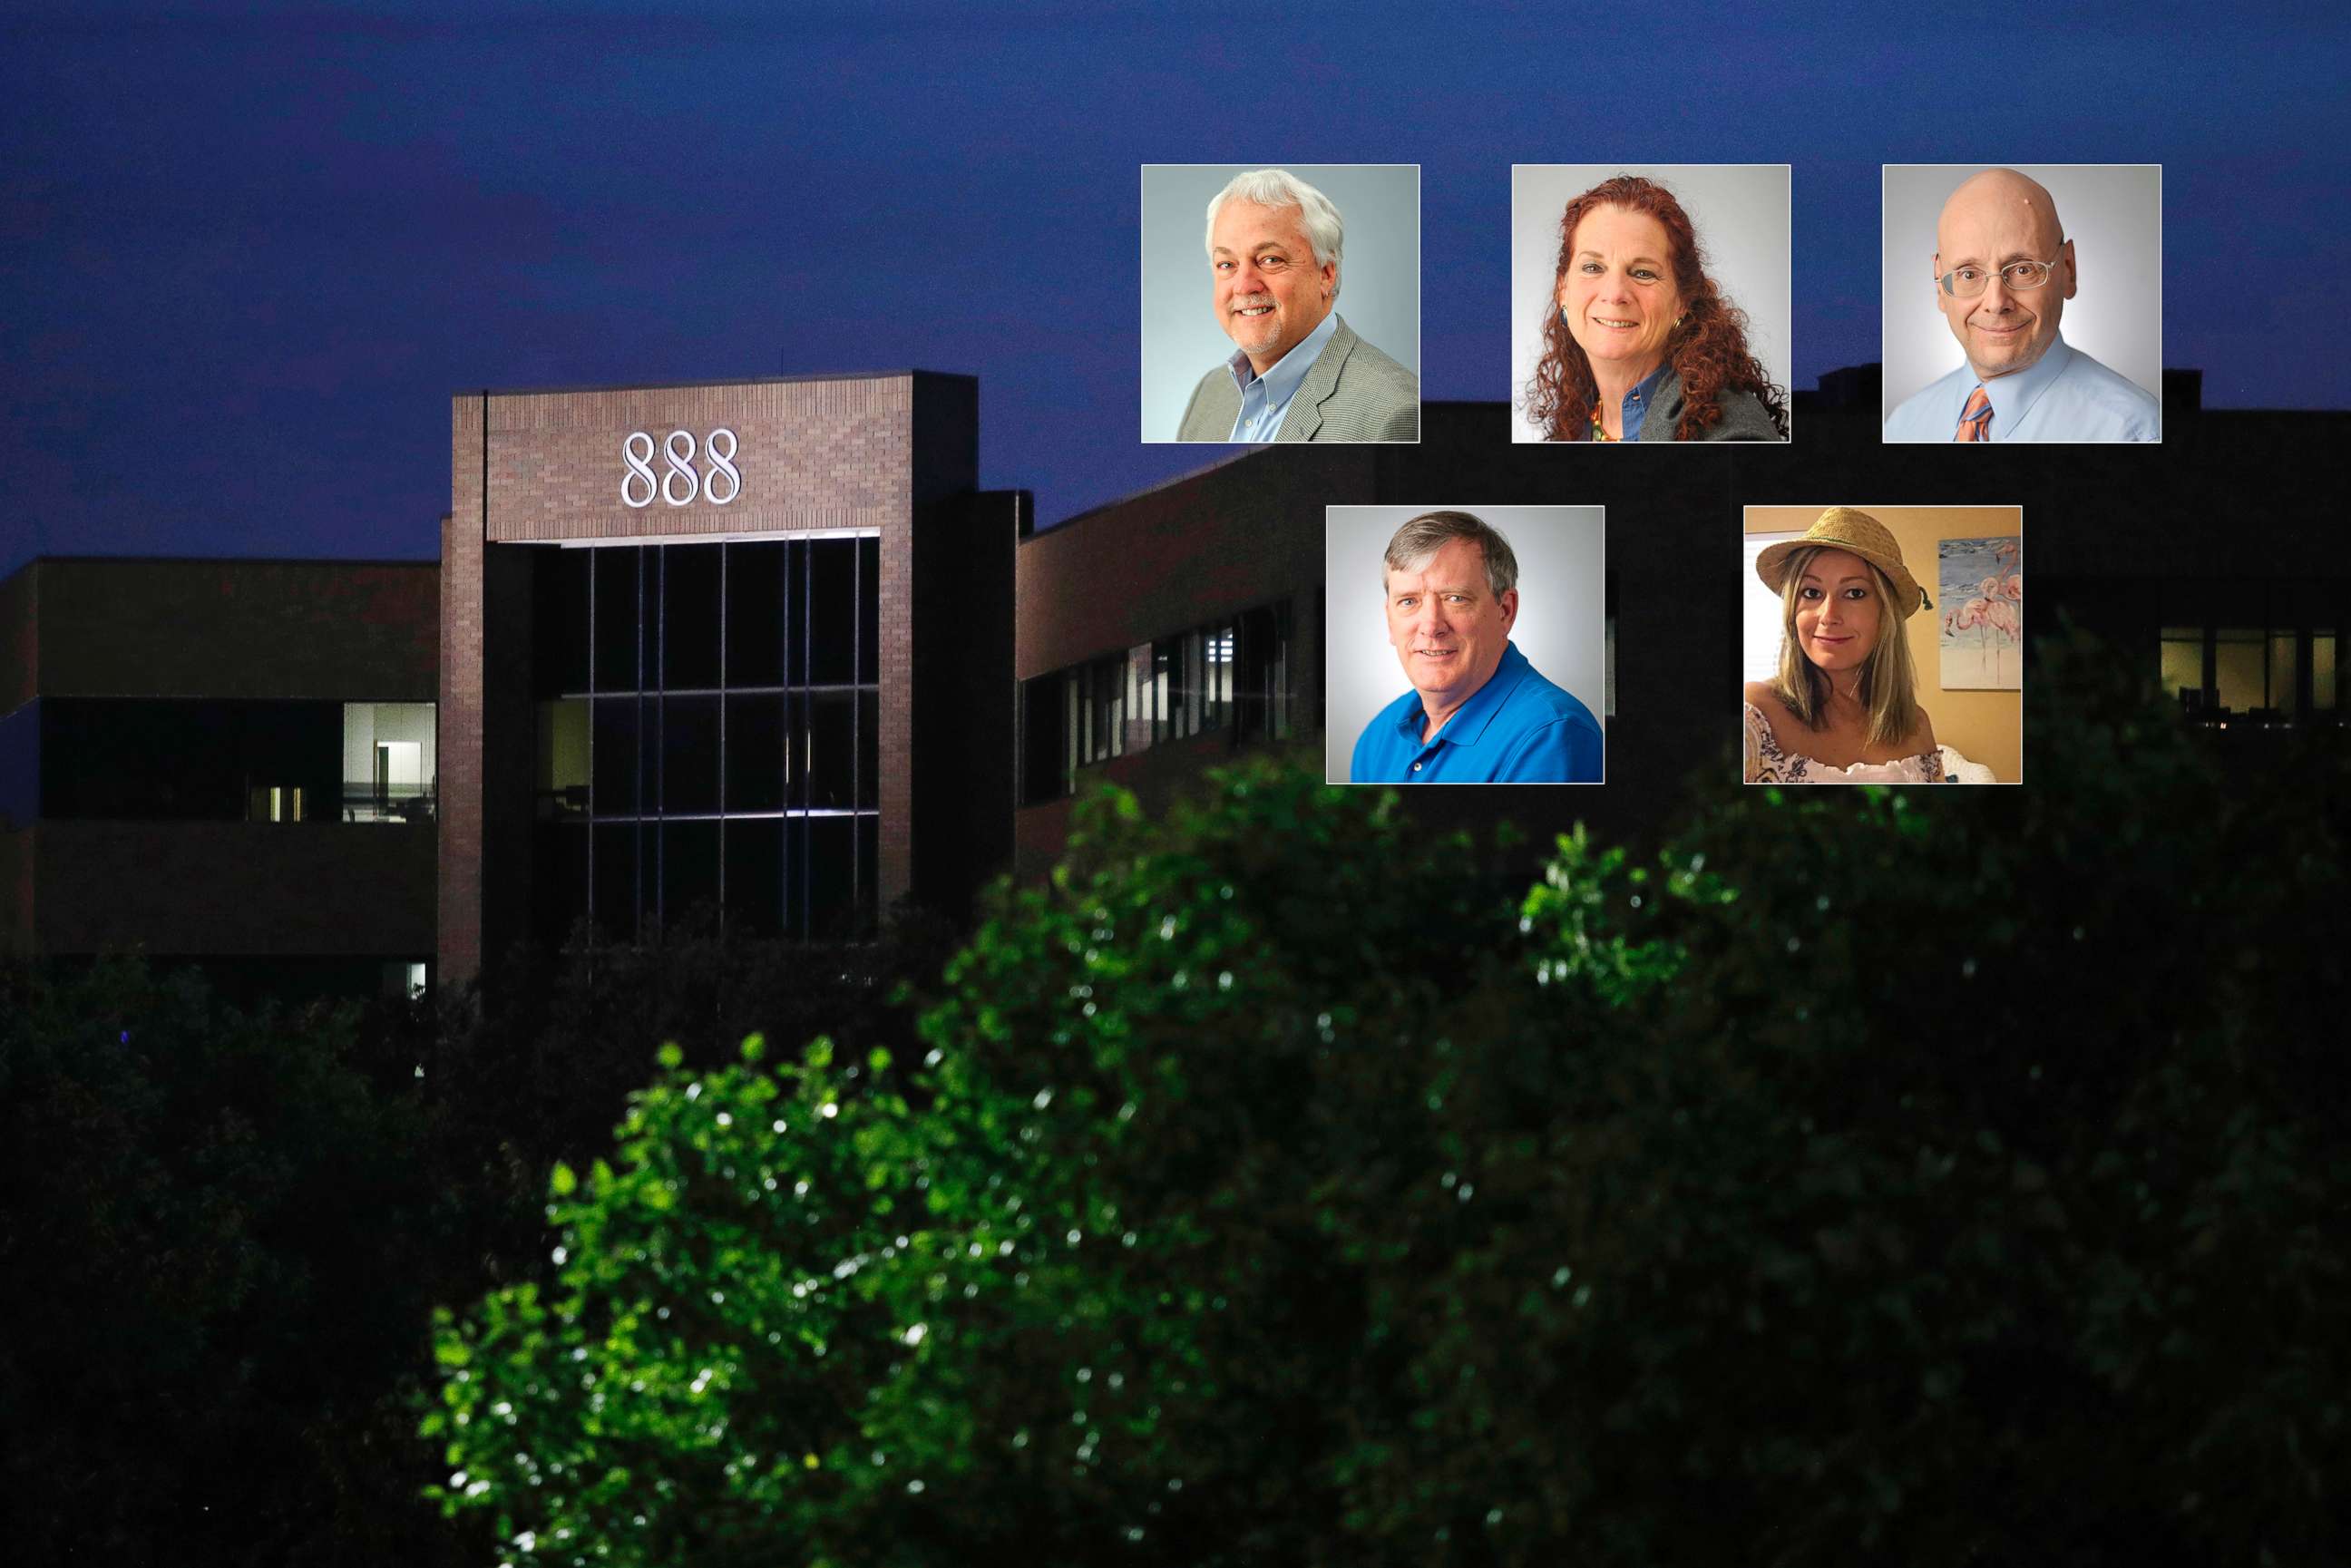 PHOTO: A building housing The Capital Gazette newspaper's offices is seen at dawn, June 29, 2018, in Annapolis, Md. Rob Hiaasen, Wendi Winters, Gerald Fischman, John McNamara and Rebecca Smith were victims in the shooting at the newspaper, June 28, 2018.